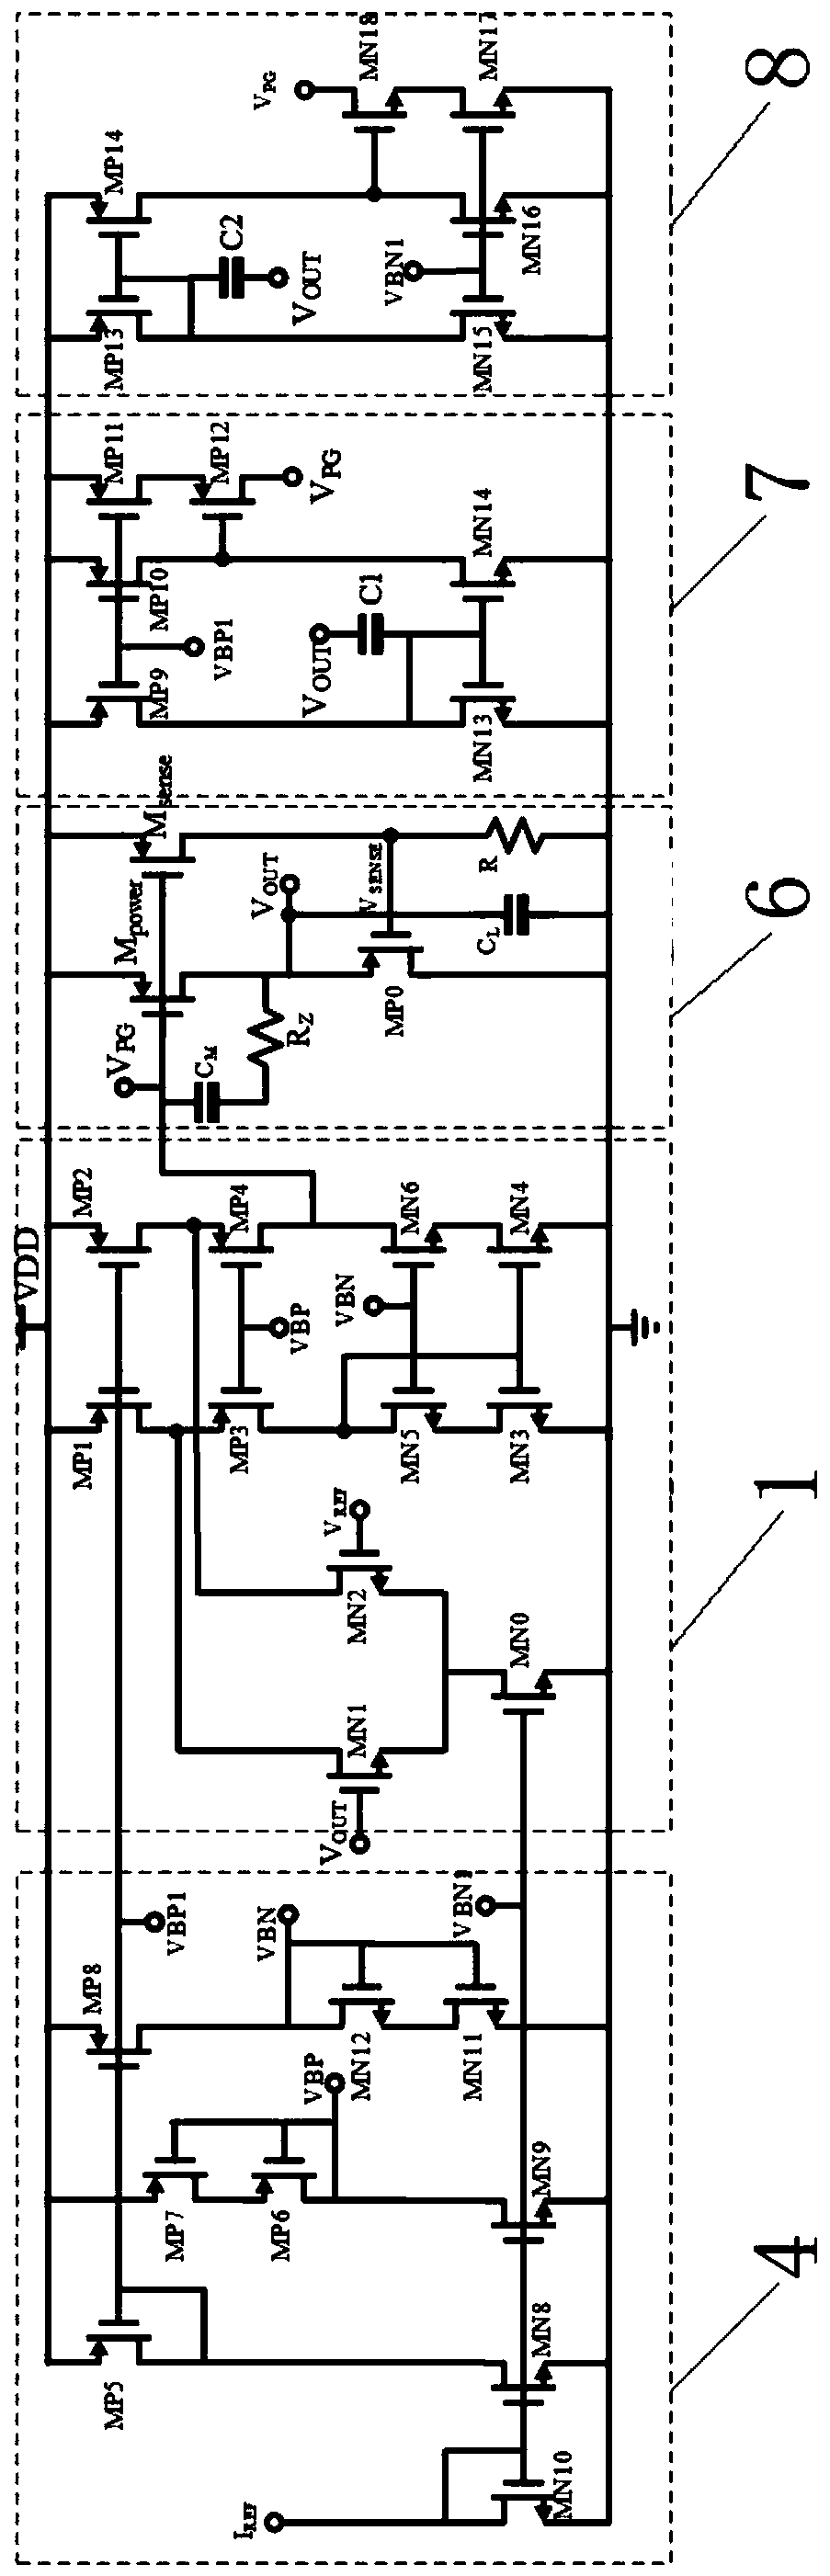 Low-voltage-difference linear voltage regulator system